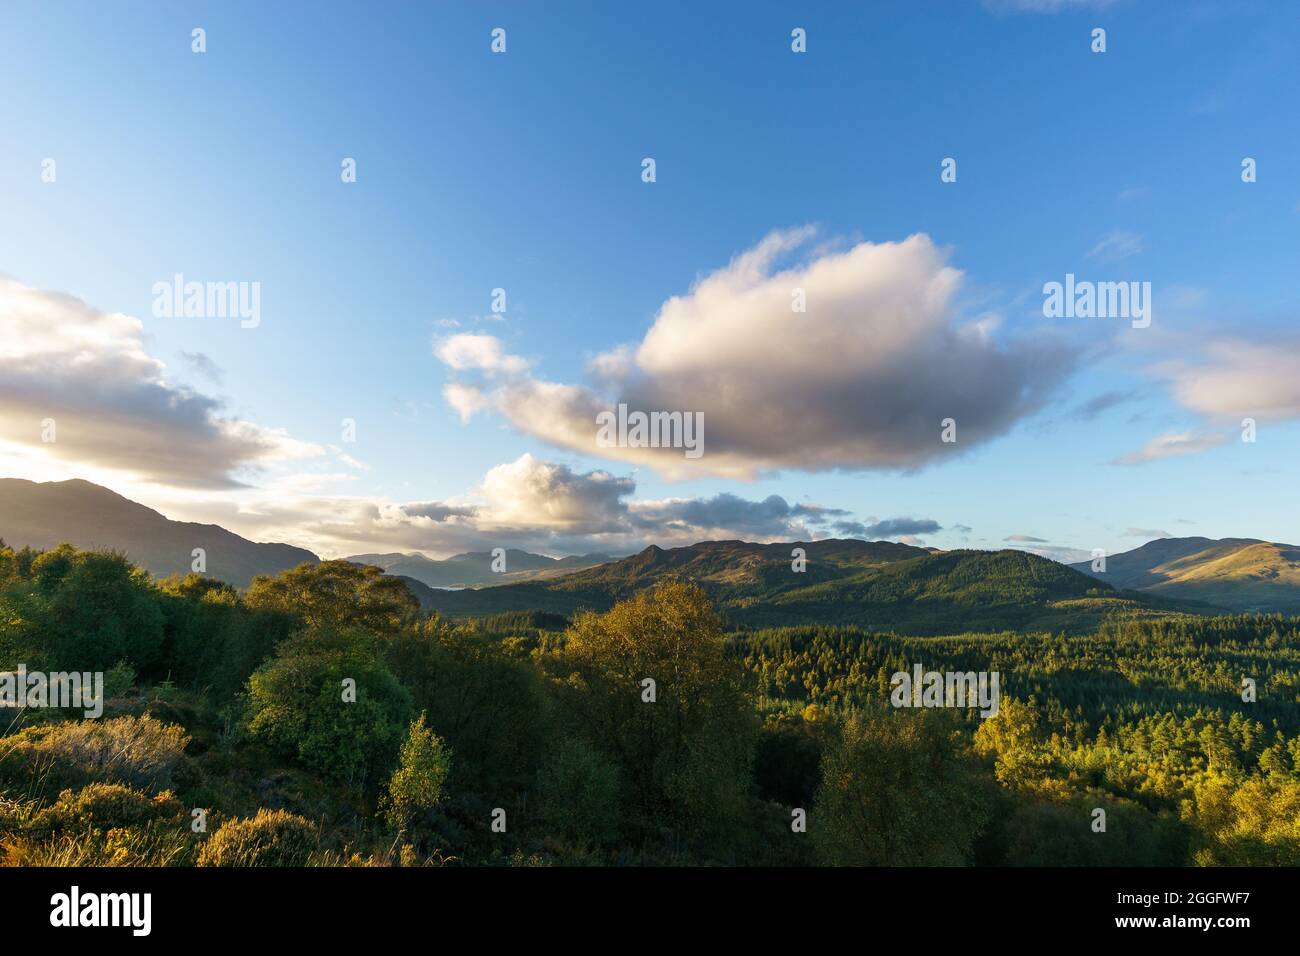 Landscape with forest of Loch Lomond and Trossachs National Park in at sunset, Scotland, United Kingdom Stock Photo